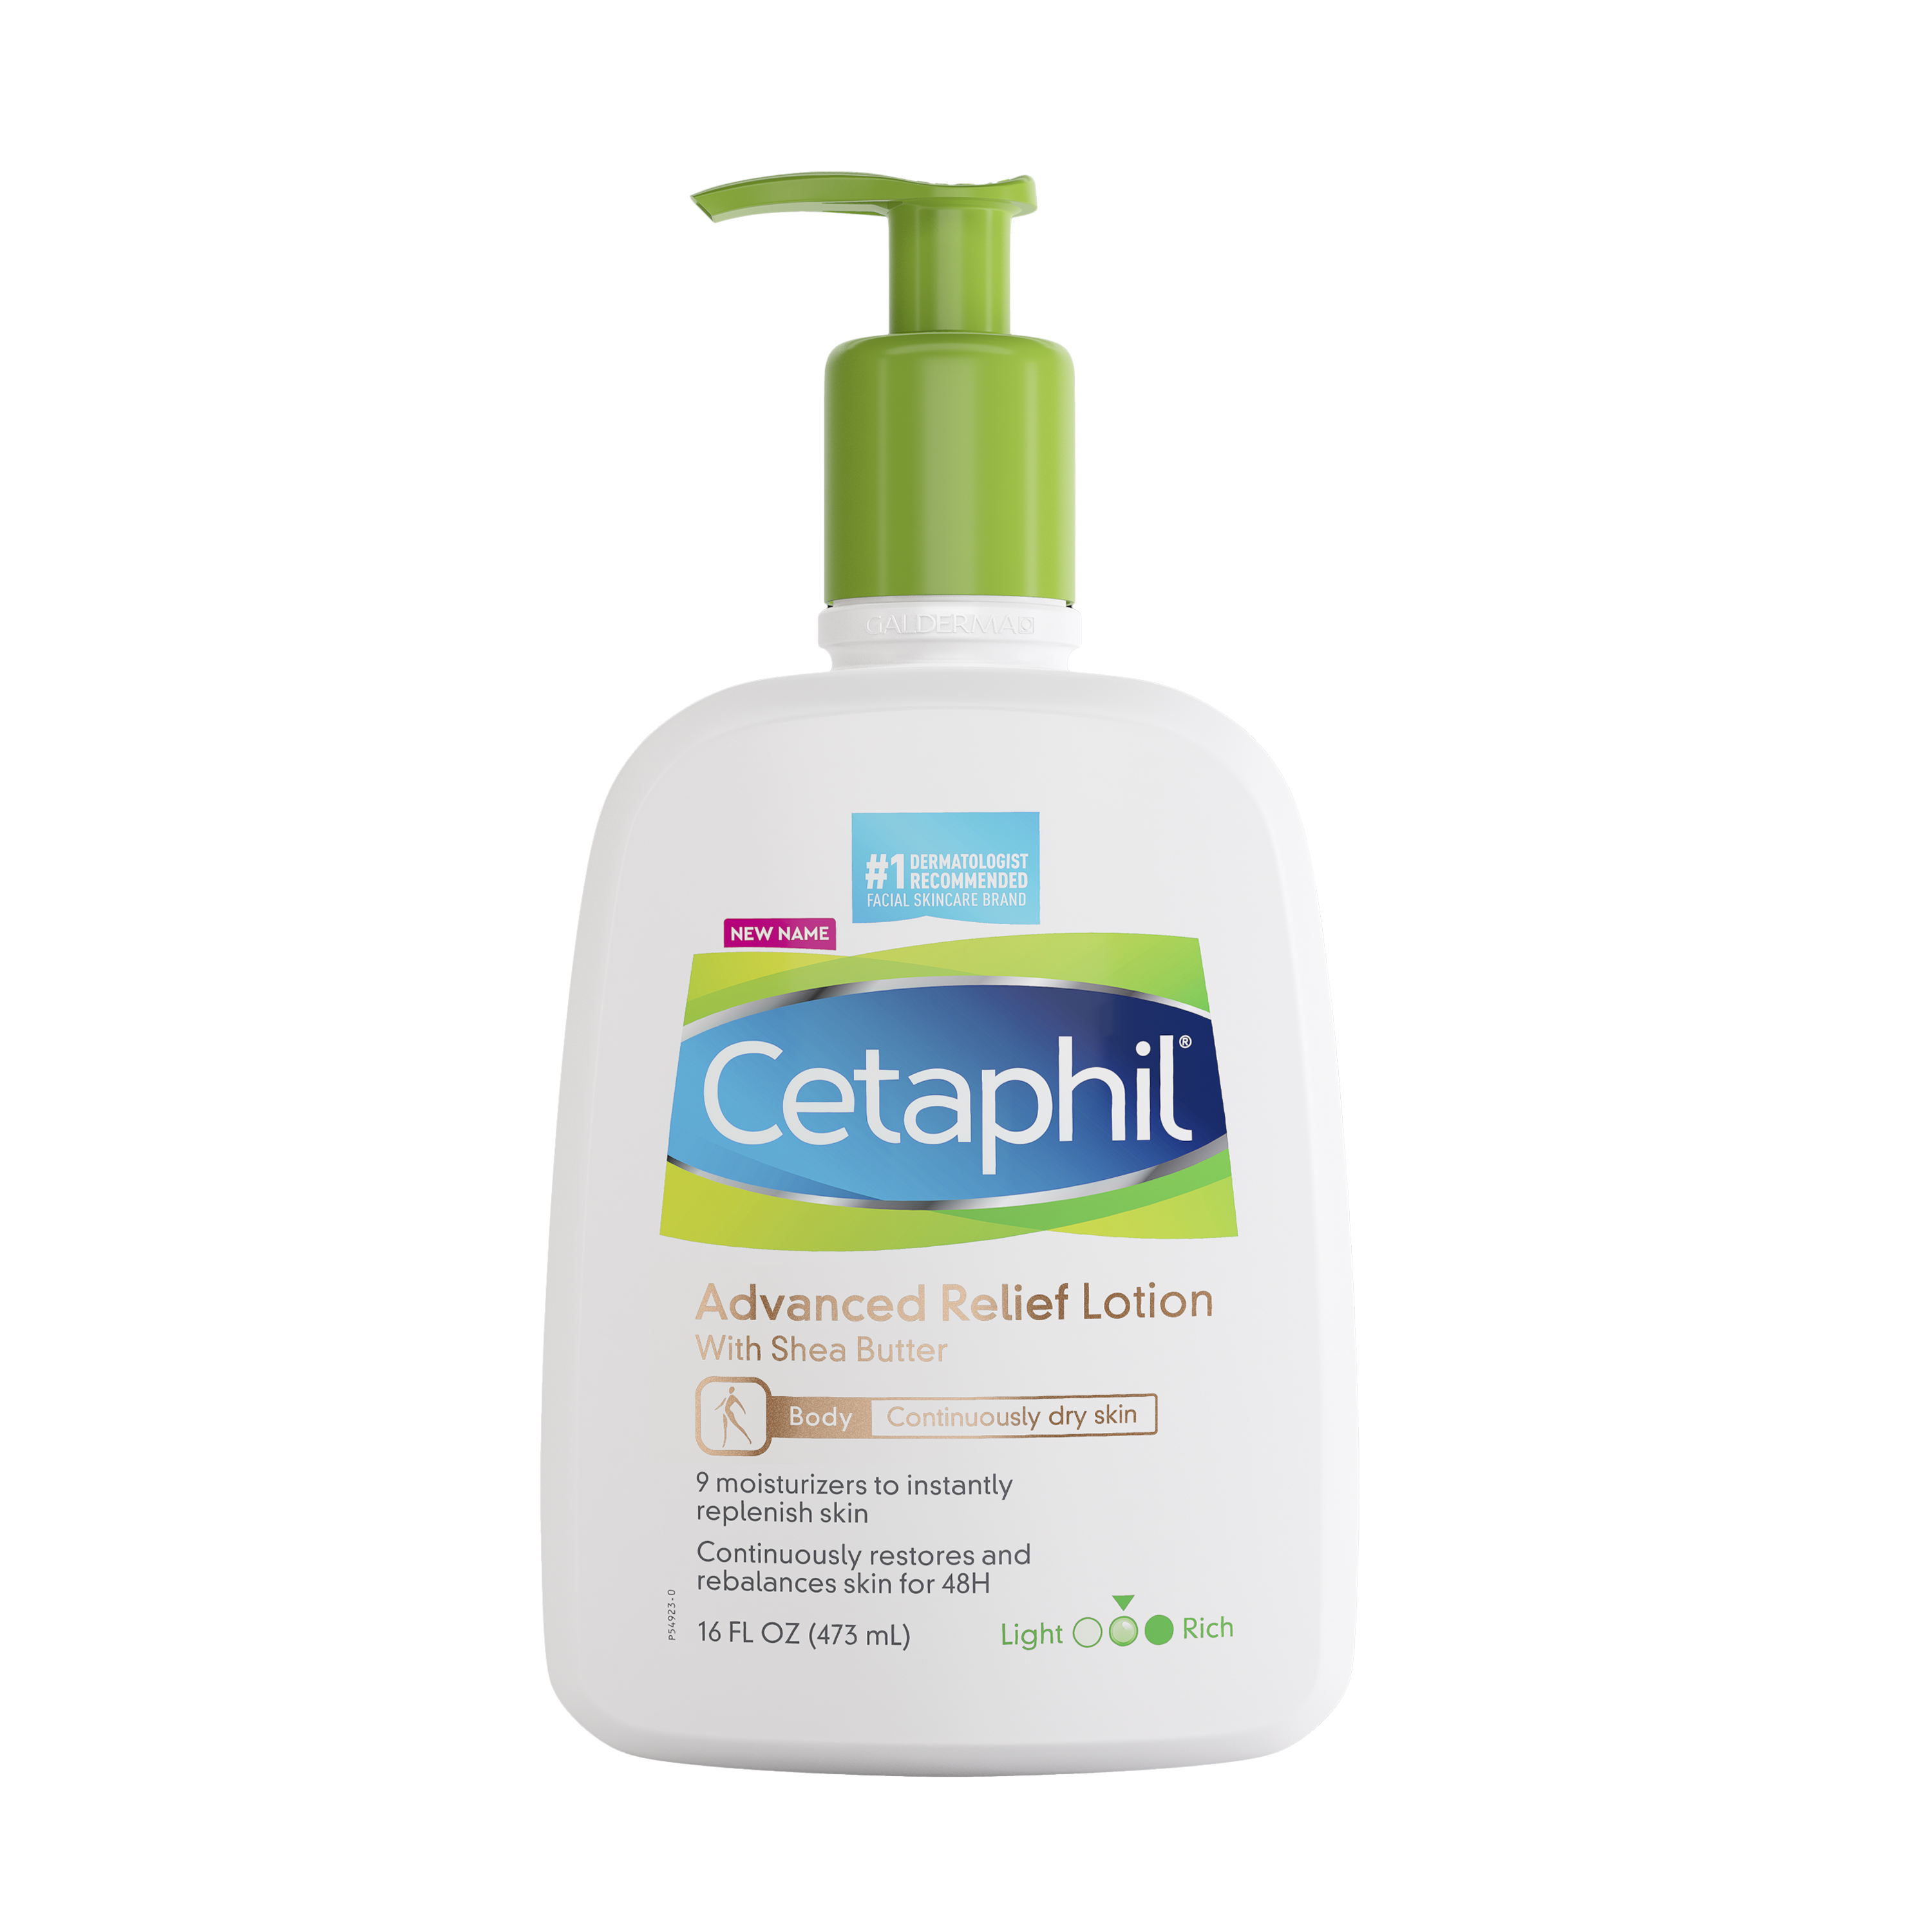 Cetaphil Advanced Relief Lotion with Shea Butter, 16 fl oz - image 1 of 6